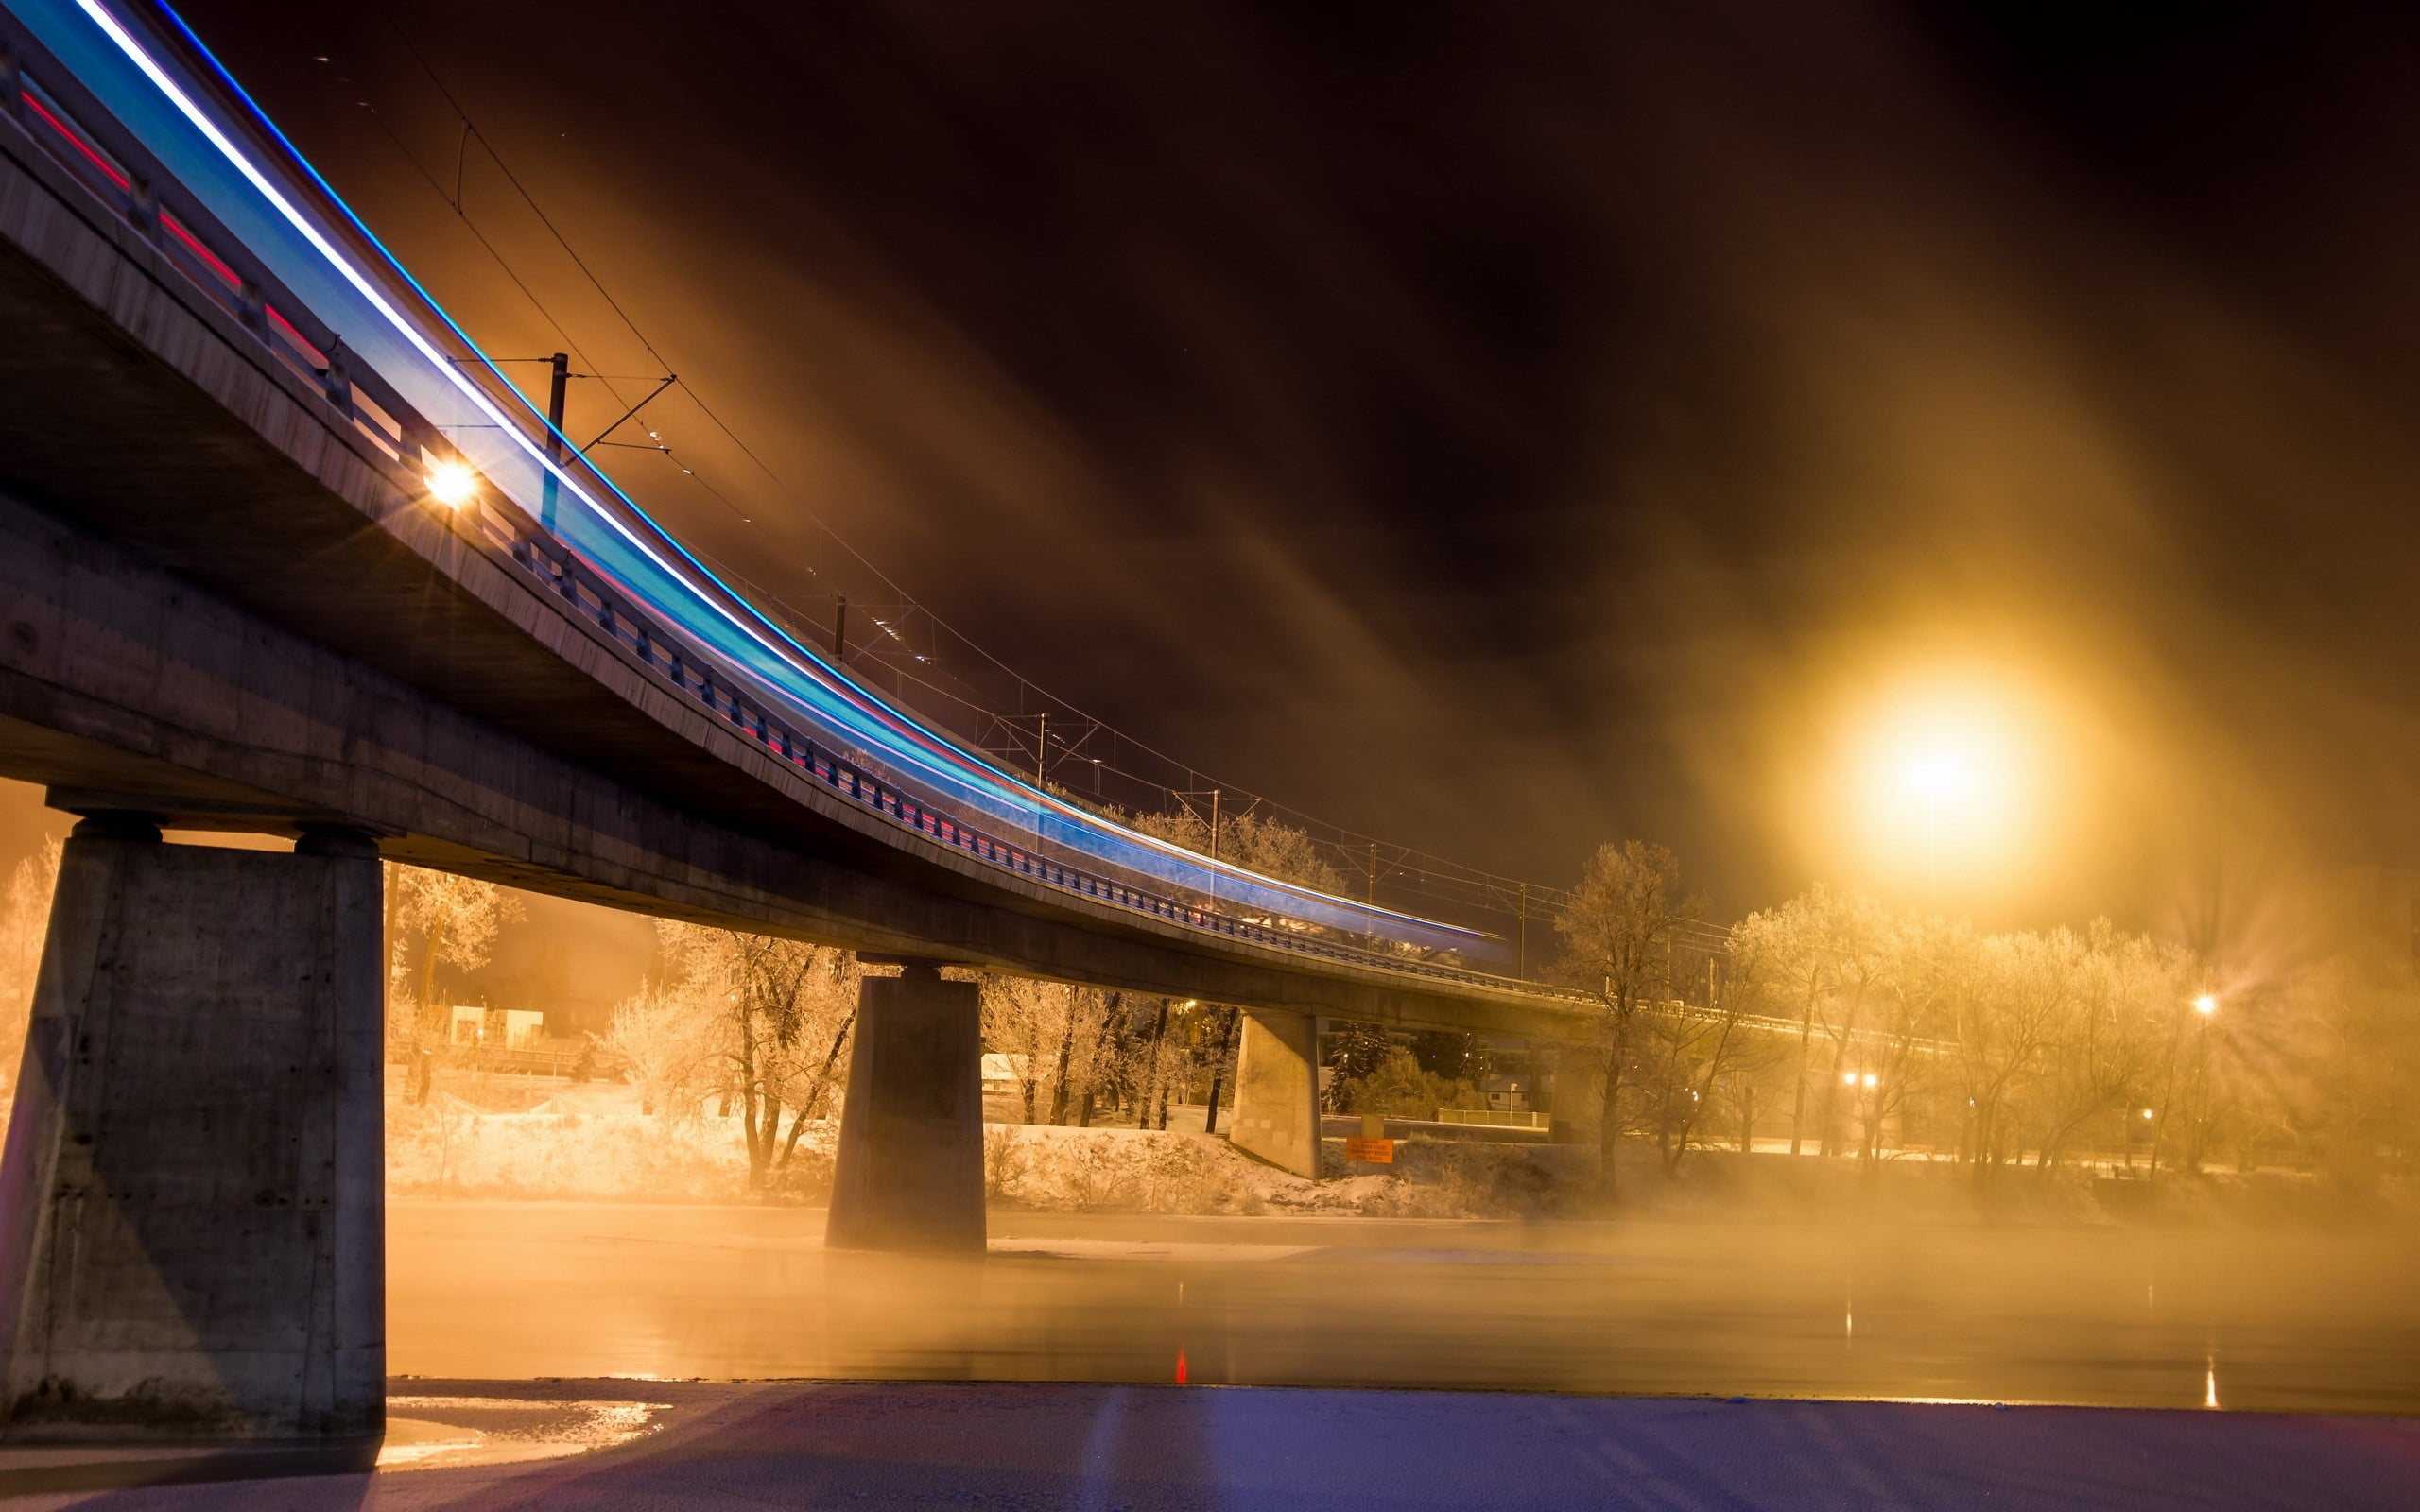 timelapse photography of train on rail